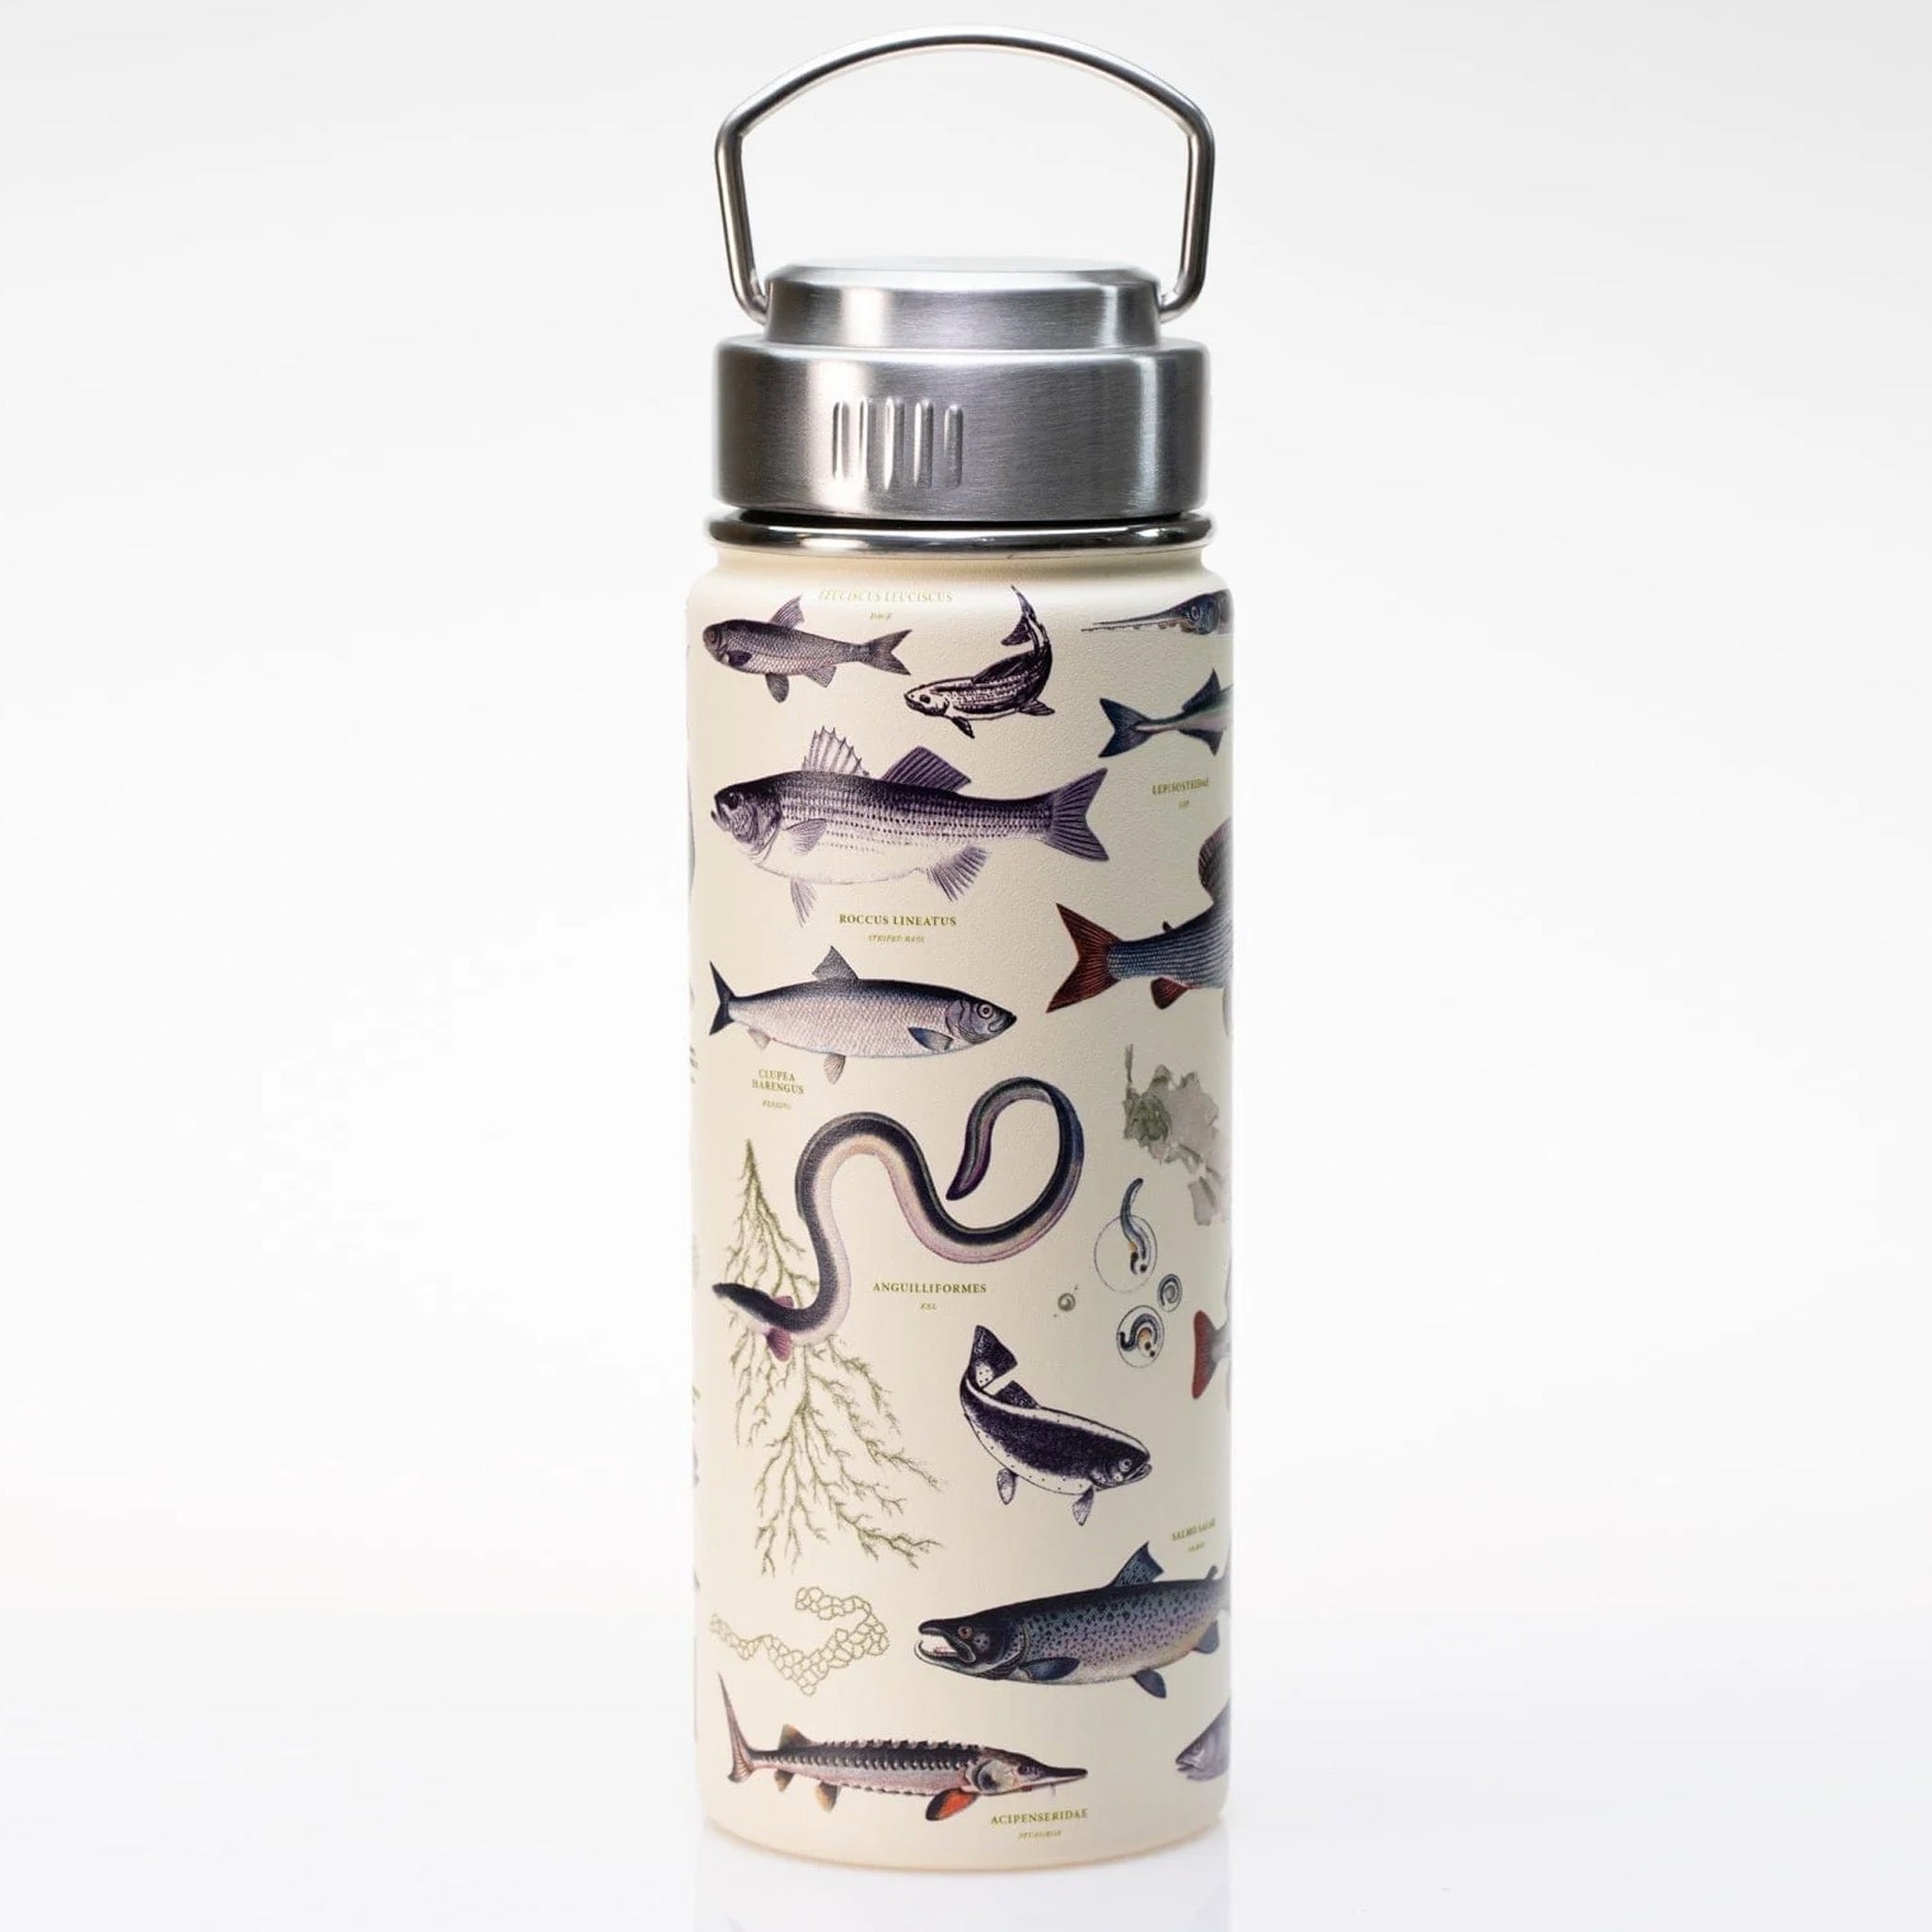 Astronomy 32 oz. Stainless Steel Water Bottle | Cognitive Surplus